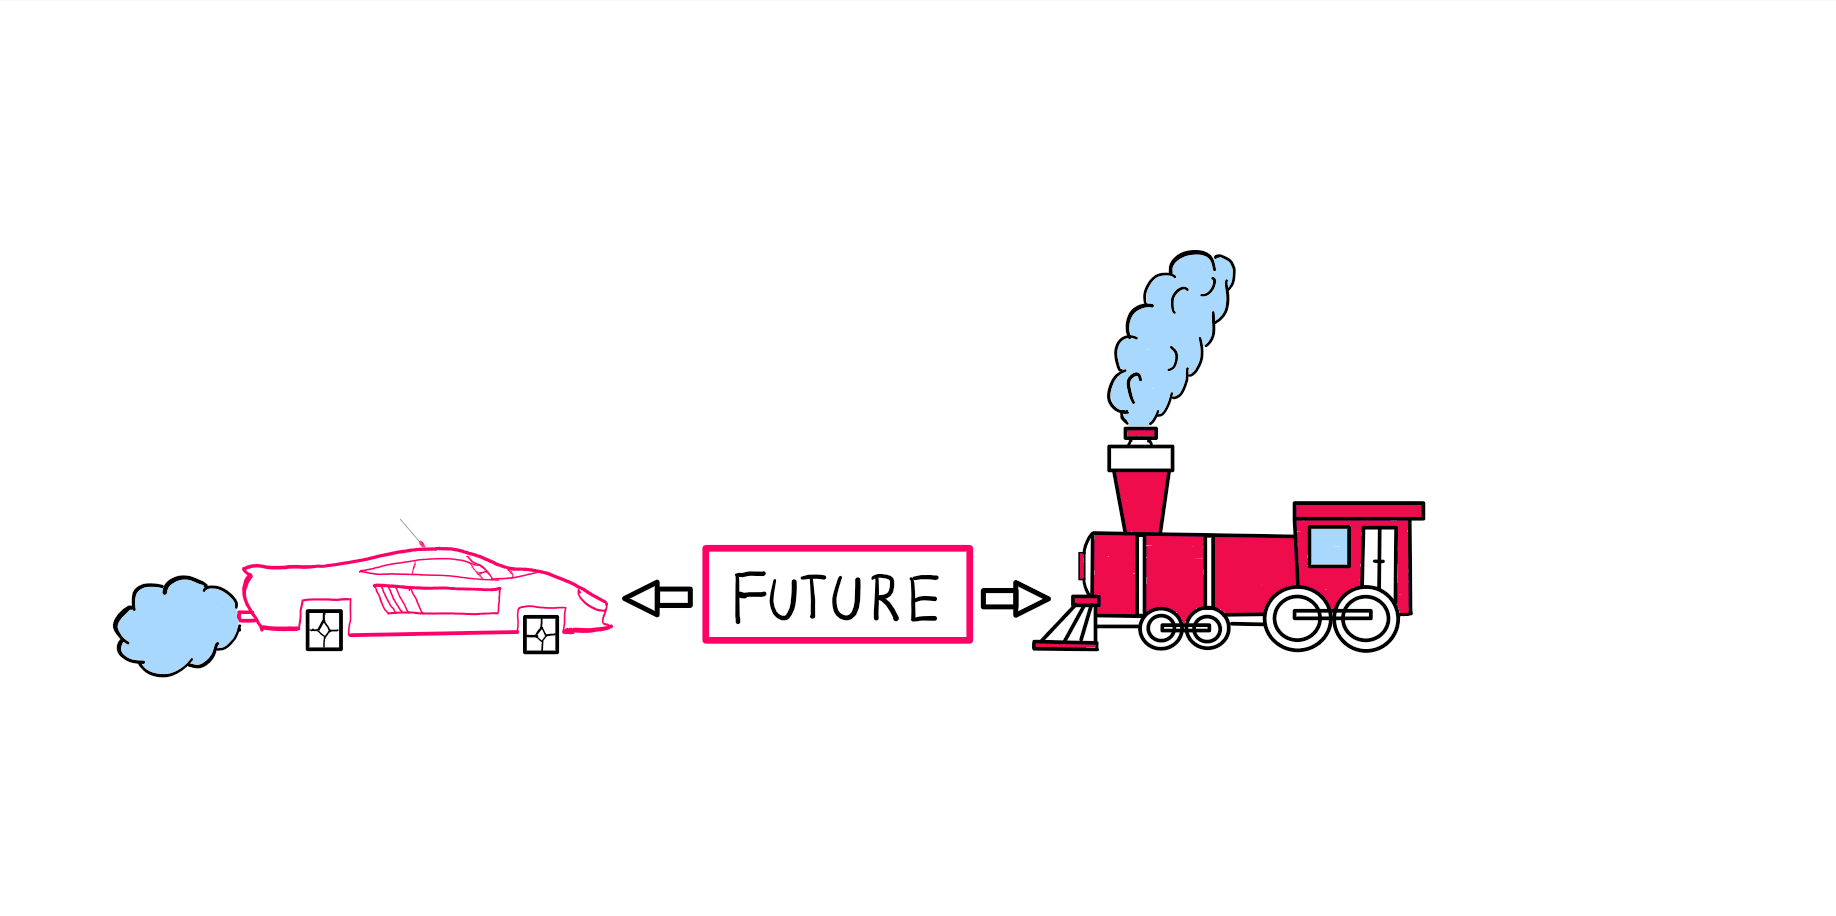 How to Understand The Accelerating Pace Of Human Progress - An illustration showing a futuristic car moving towards a cute-looking steam locomotive. As the meet, a block of text saying "future" points in either direction.